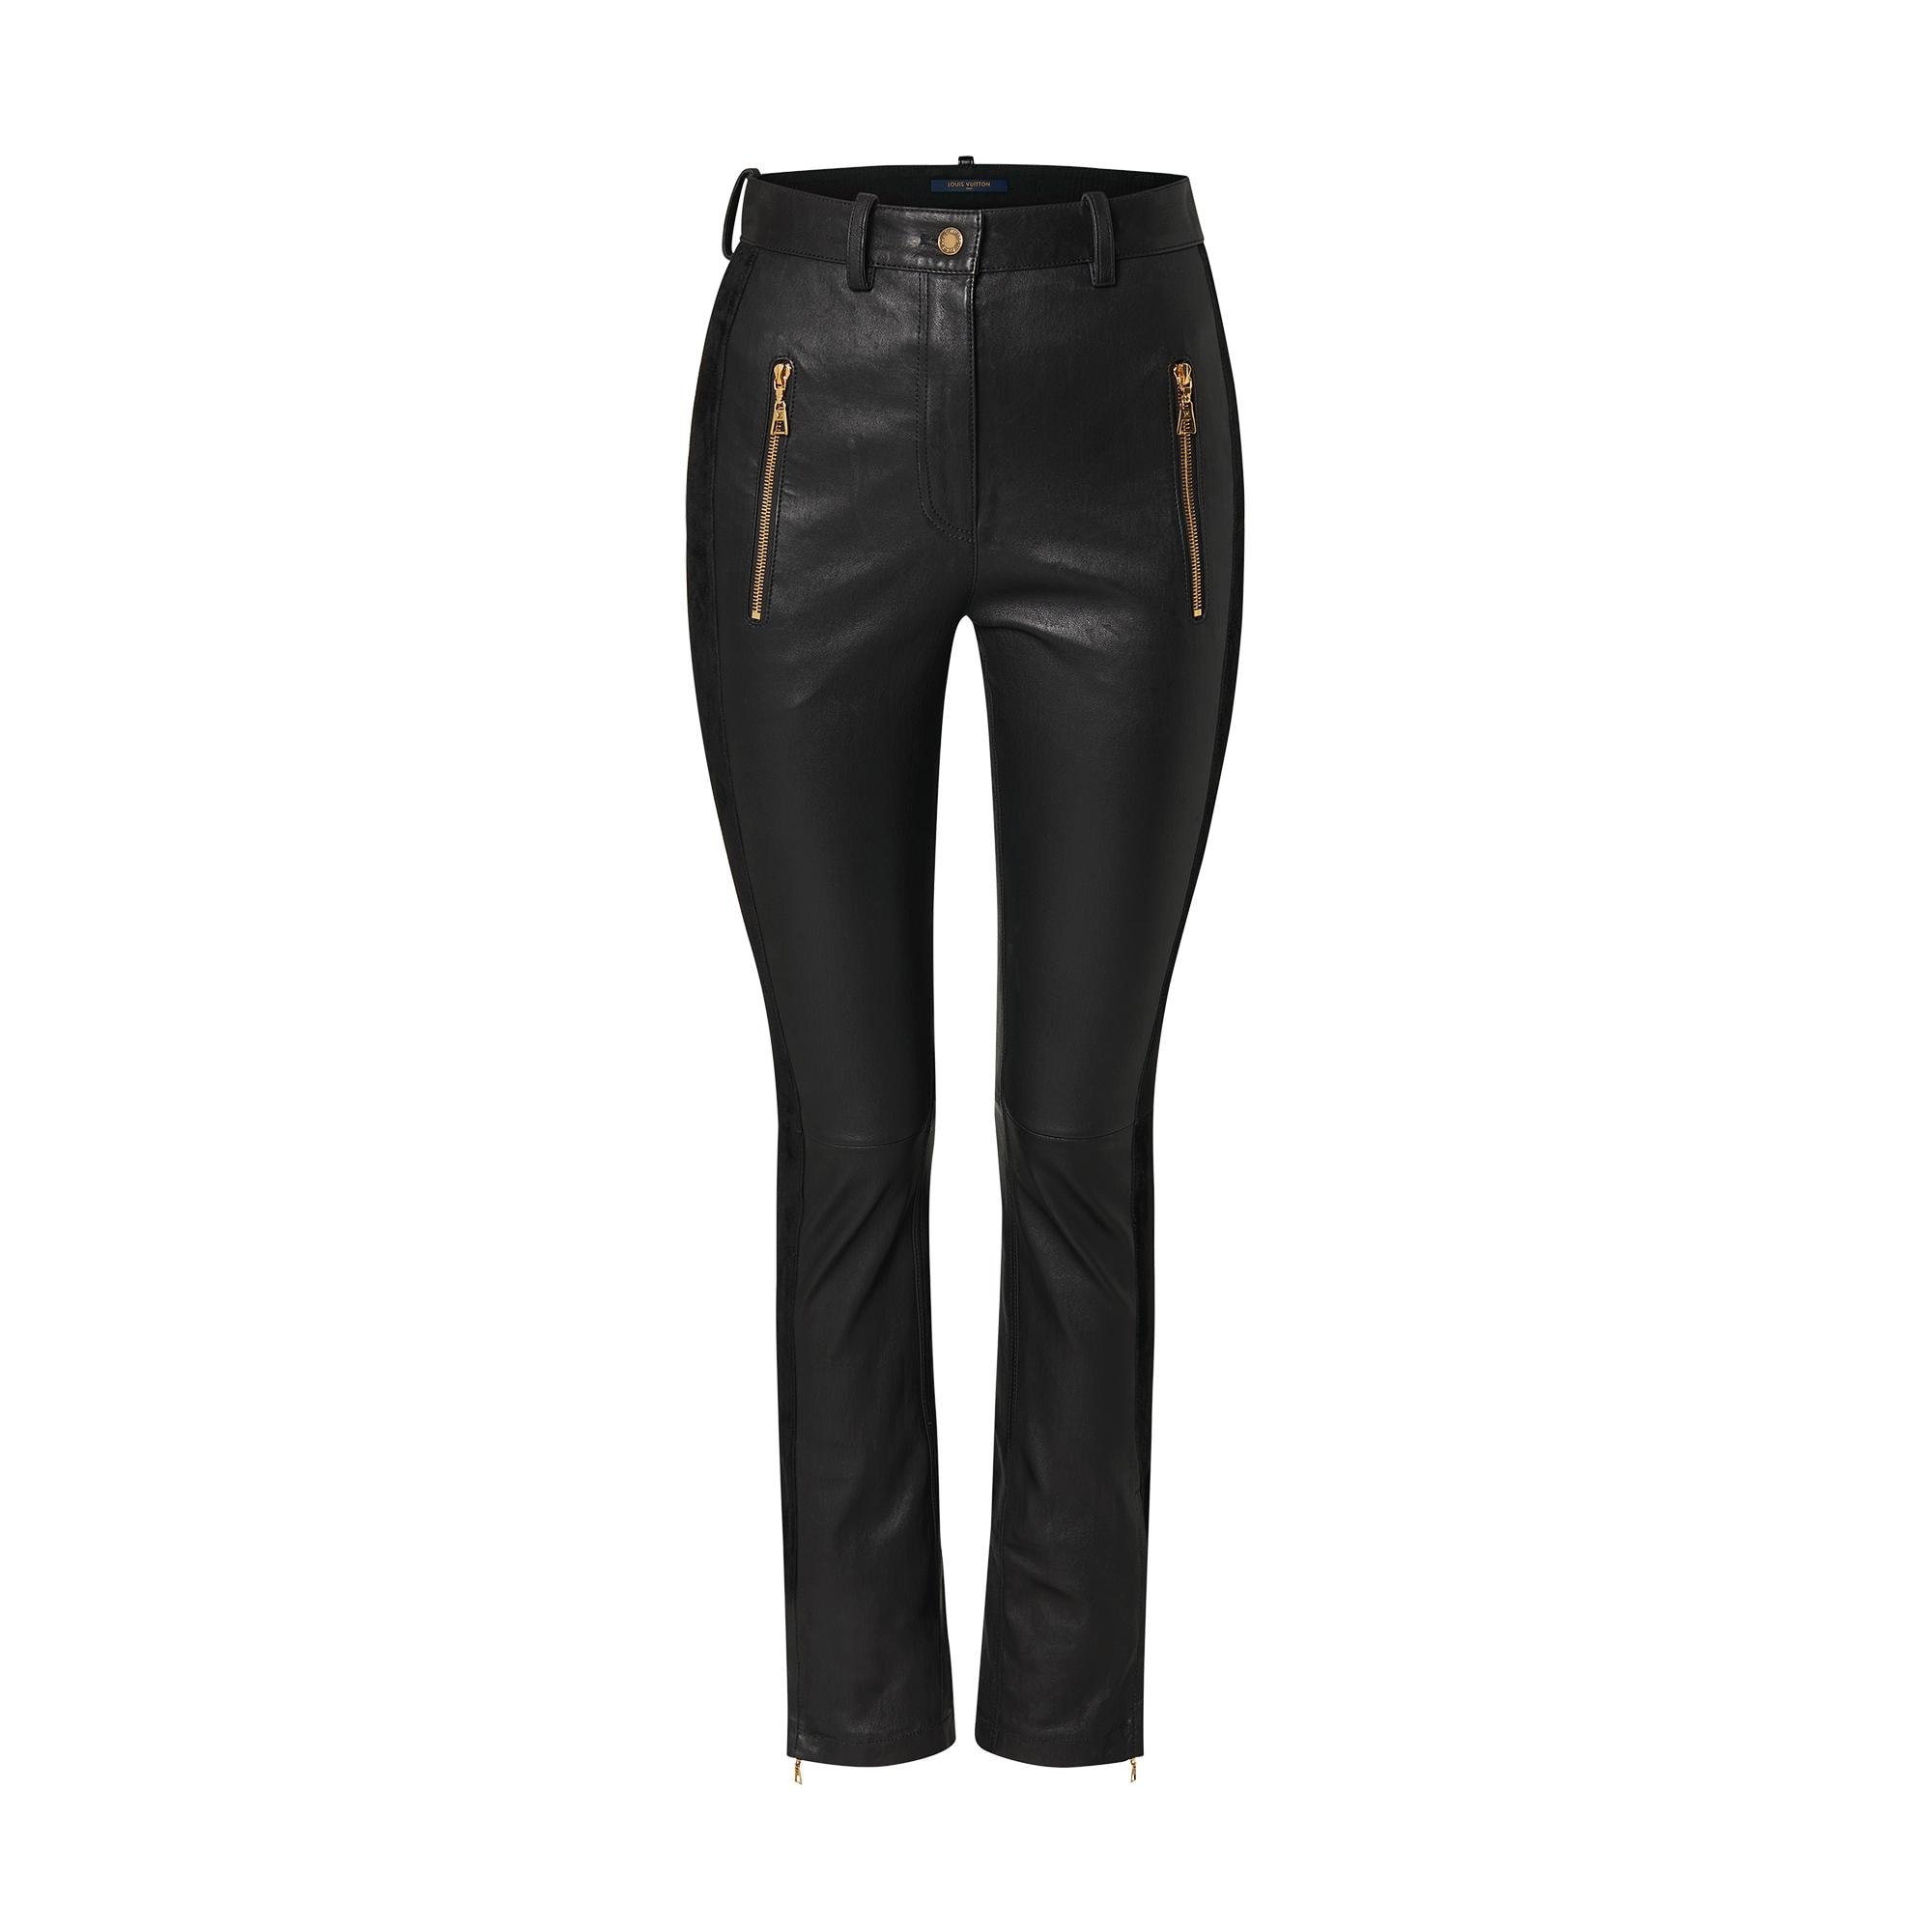 Suede Insert Leather Pants - 1